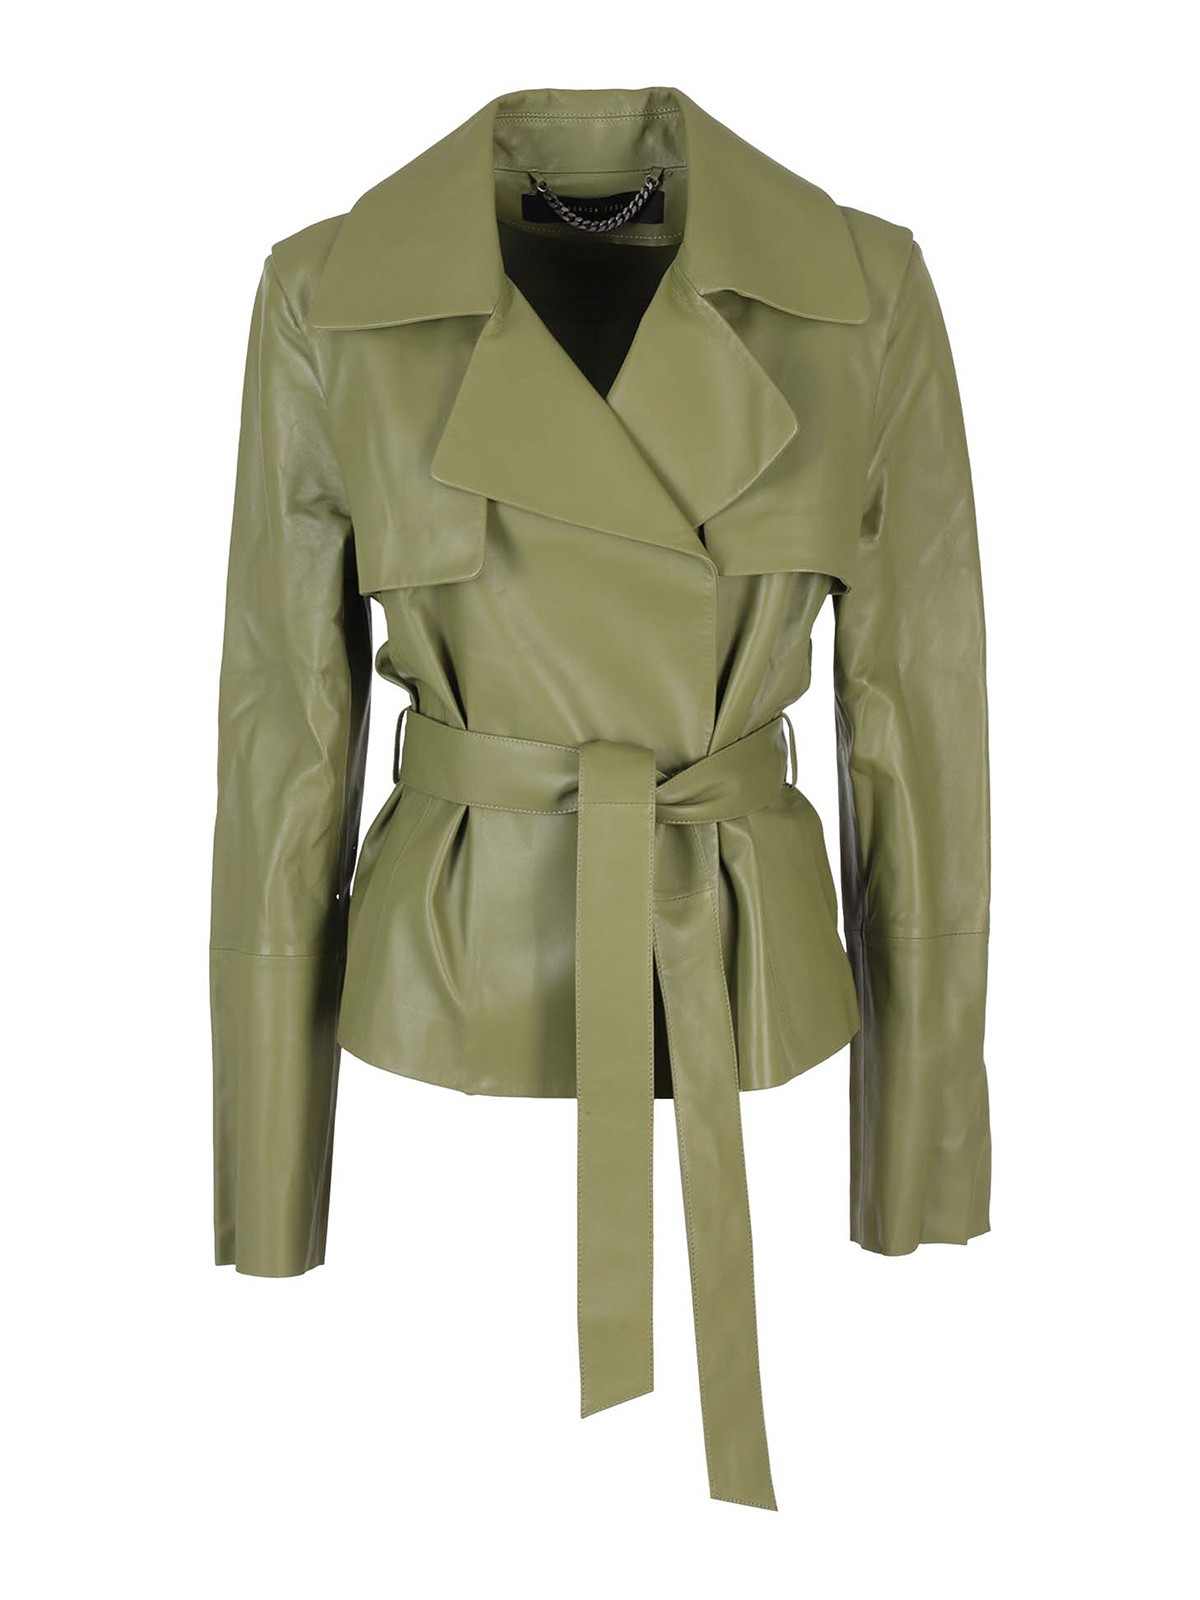 FEDERICA TOSI BELTED LEATHER JACKET